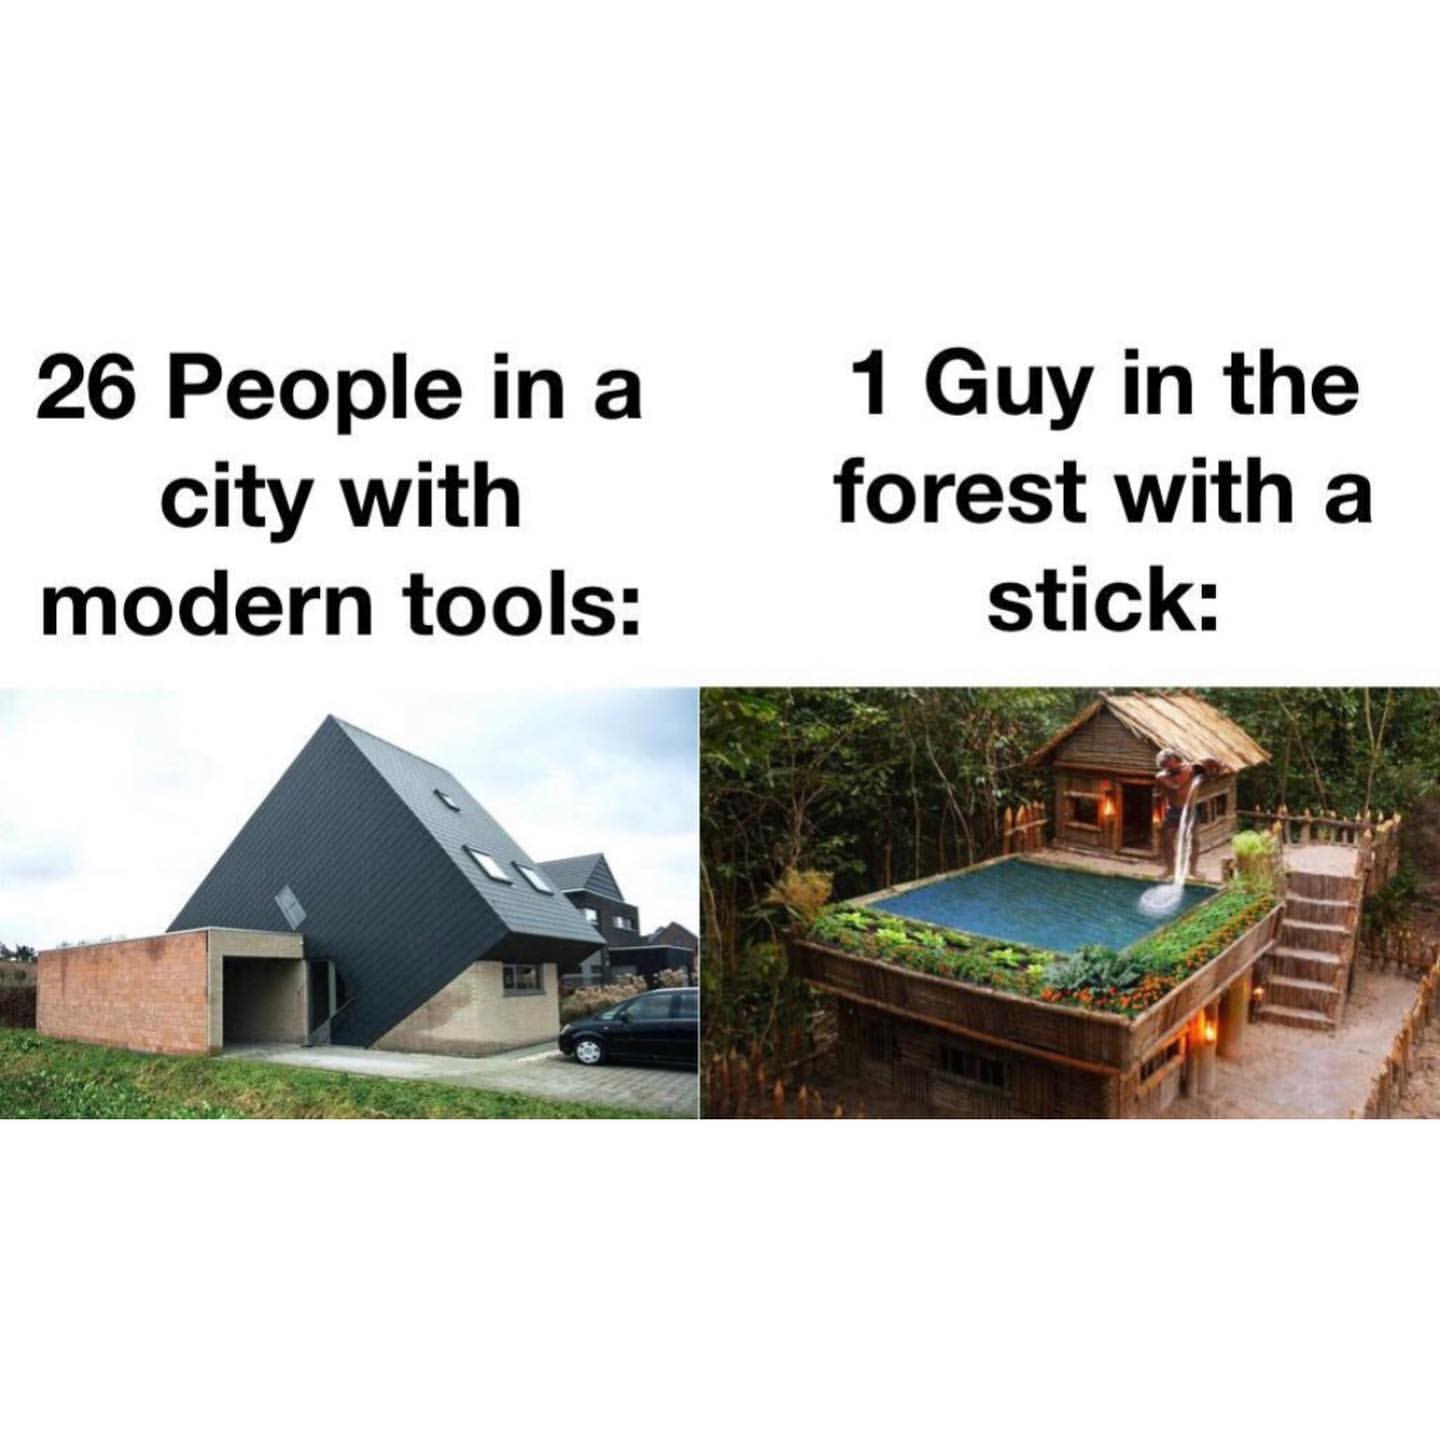 26 People in a city with modern tools: 1 Guy in the forest with a stick: